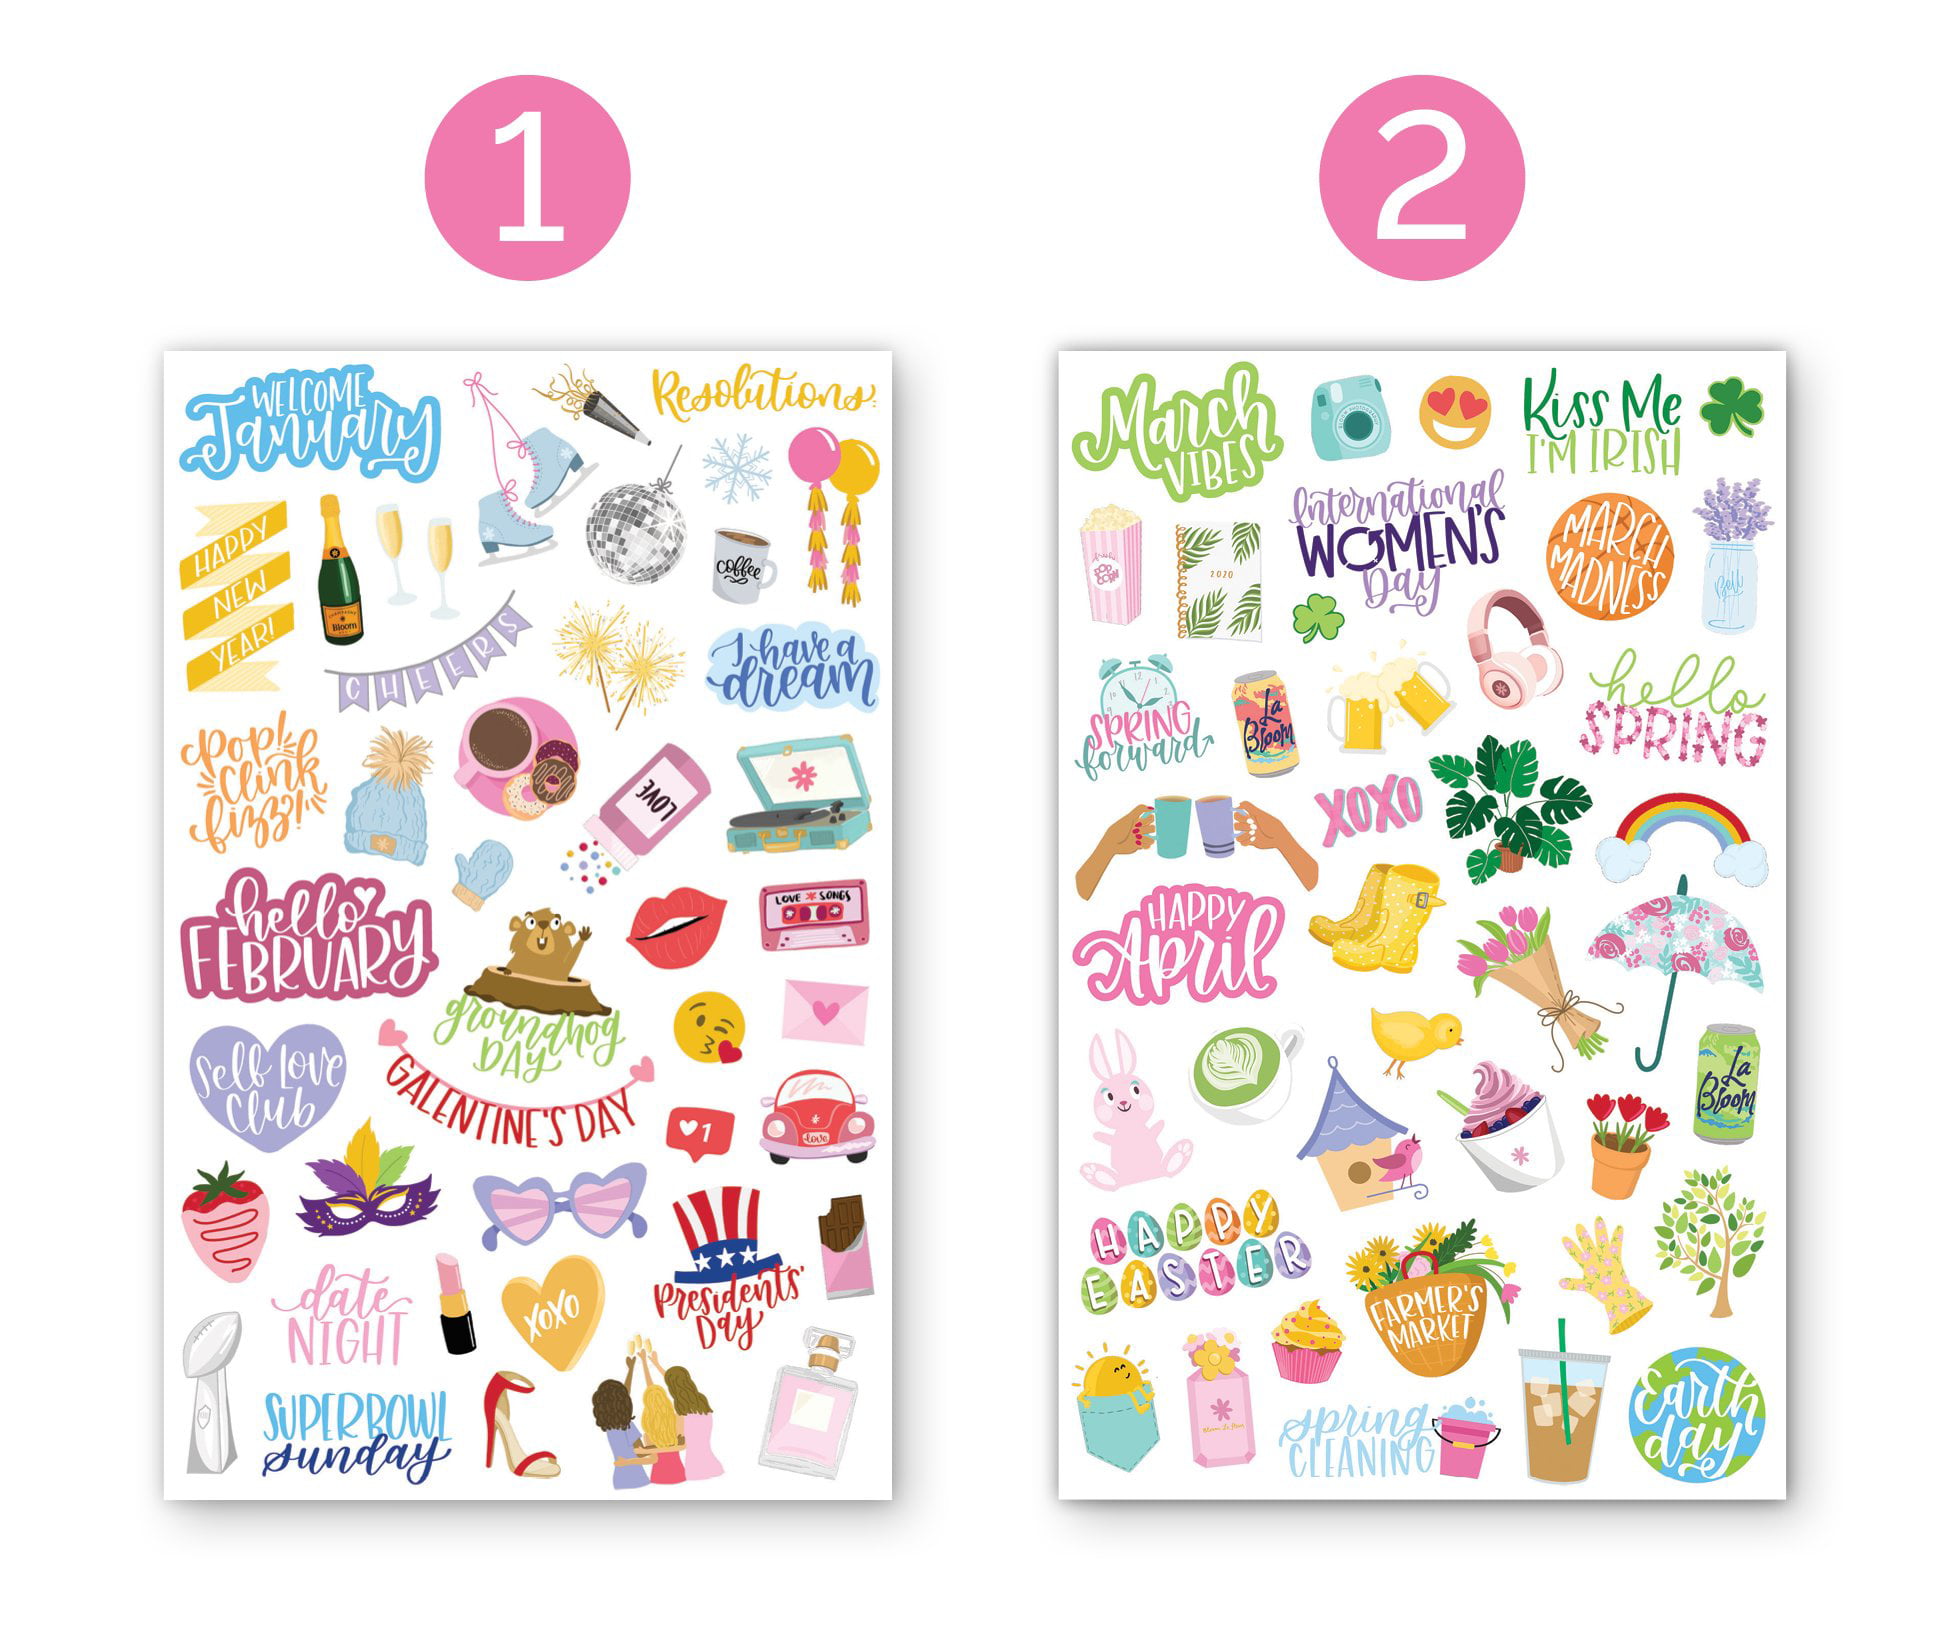 bloom daily planners Holiday Planner Stickers, Over 250 Stickers